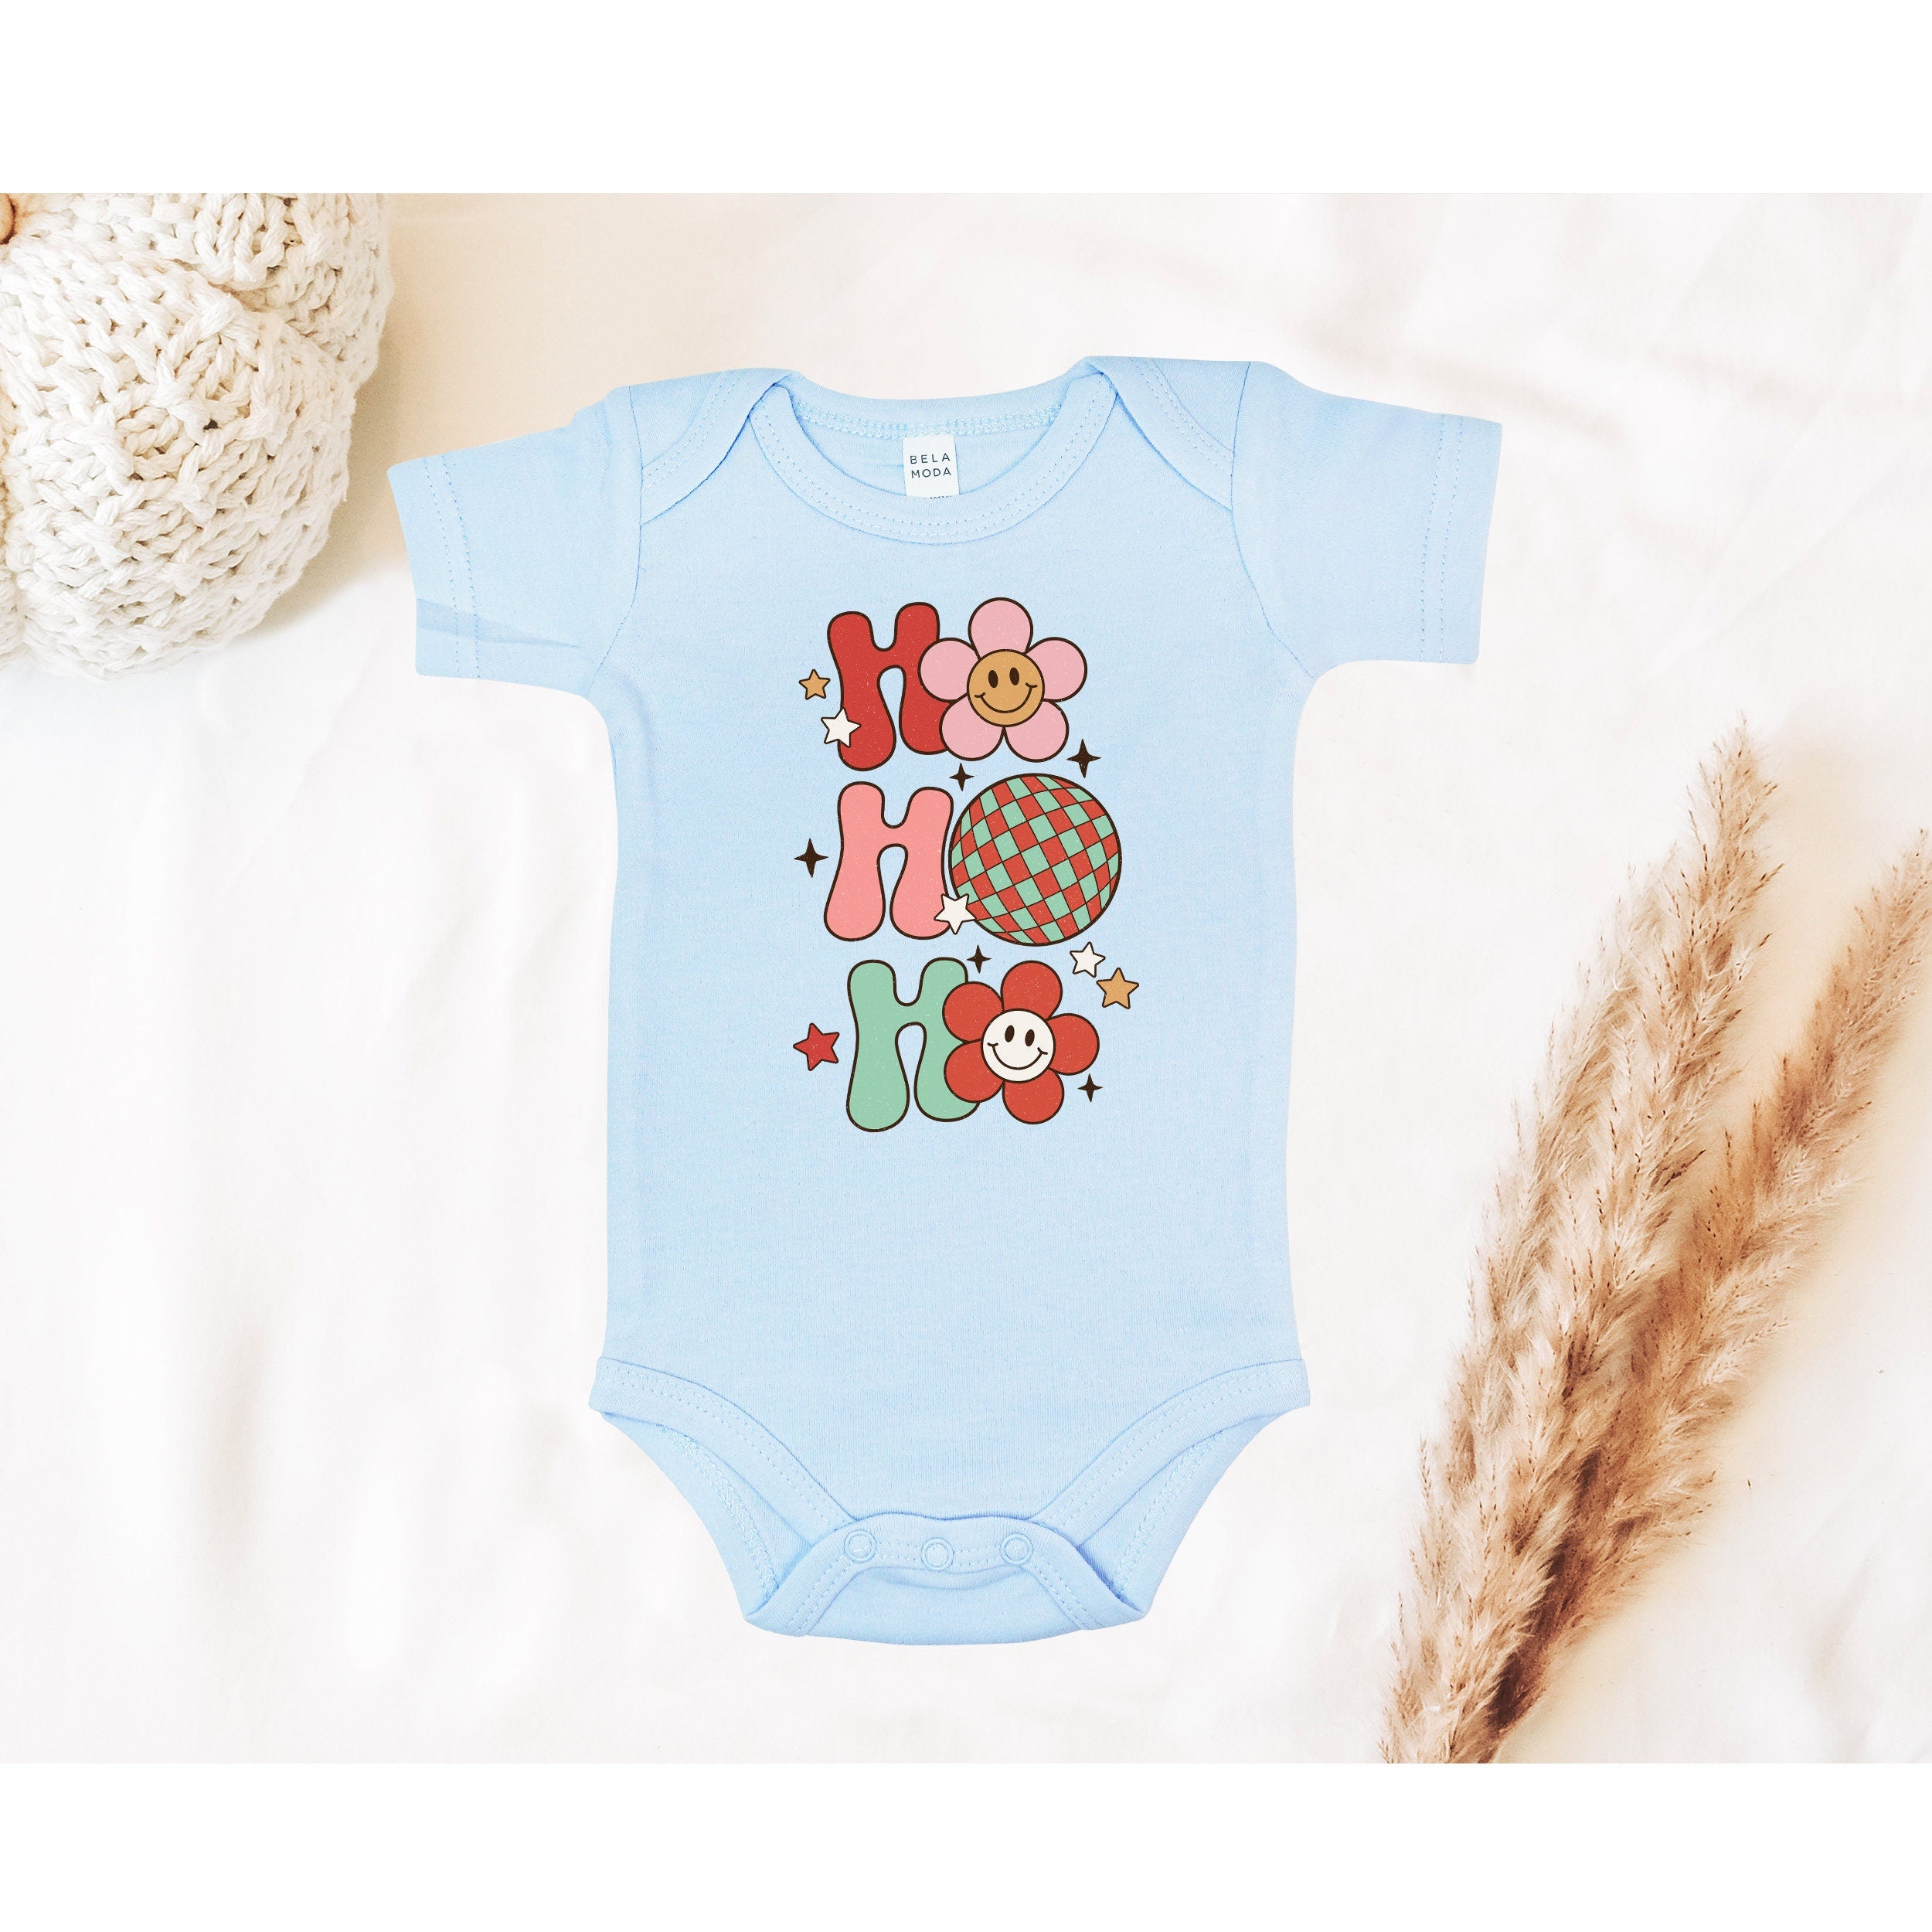 First Baby's Christmas, Baby Christmas Bodysuit, Christmas Baby Outfit, First Christmas Baby Outfit